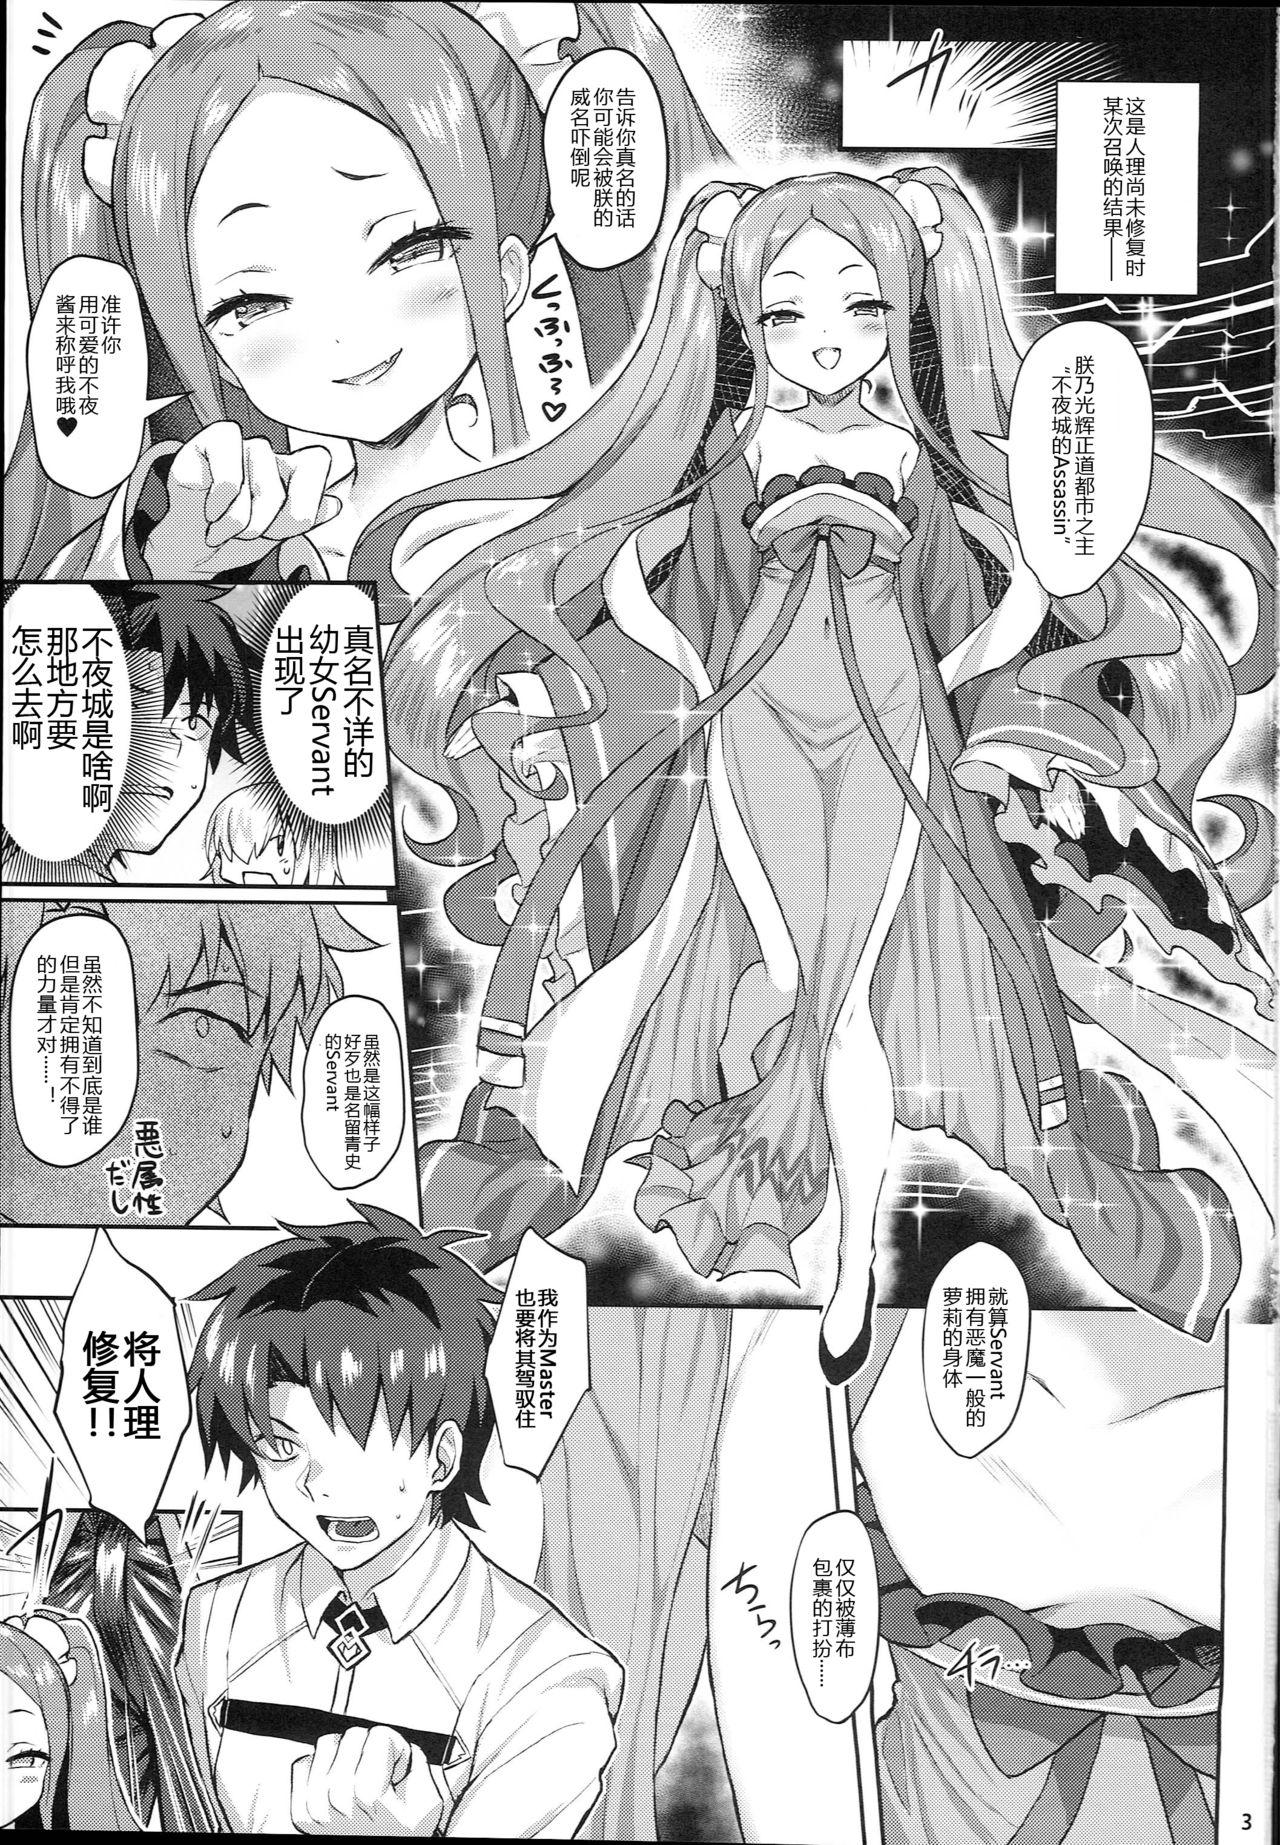 Good Fuya Syndrome - Sleepless Syndrome - Fate grand order Gay Largedick - Page 4